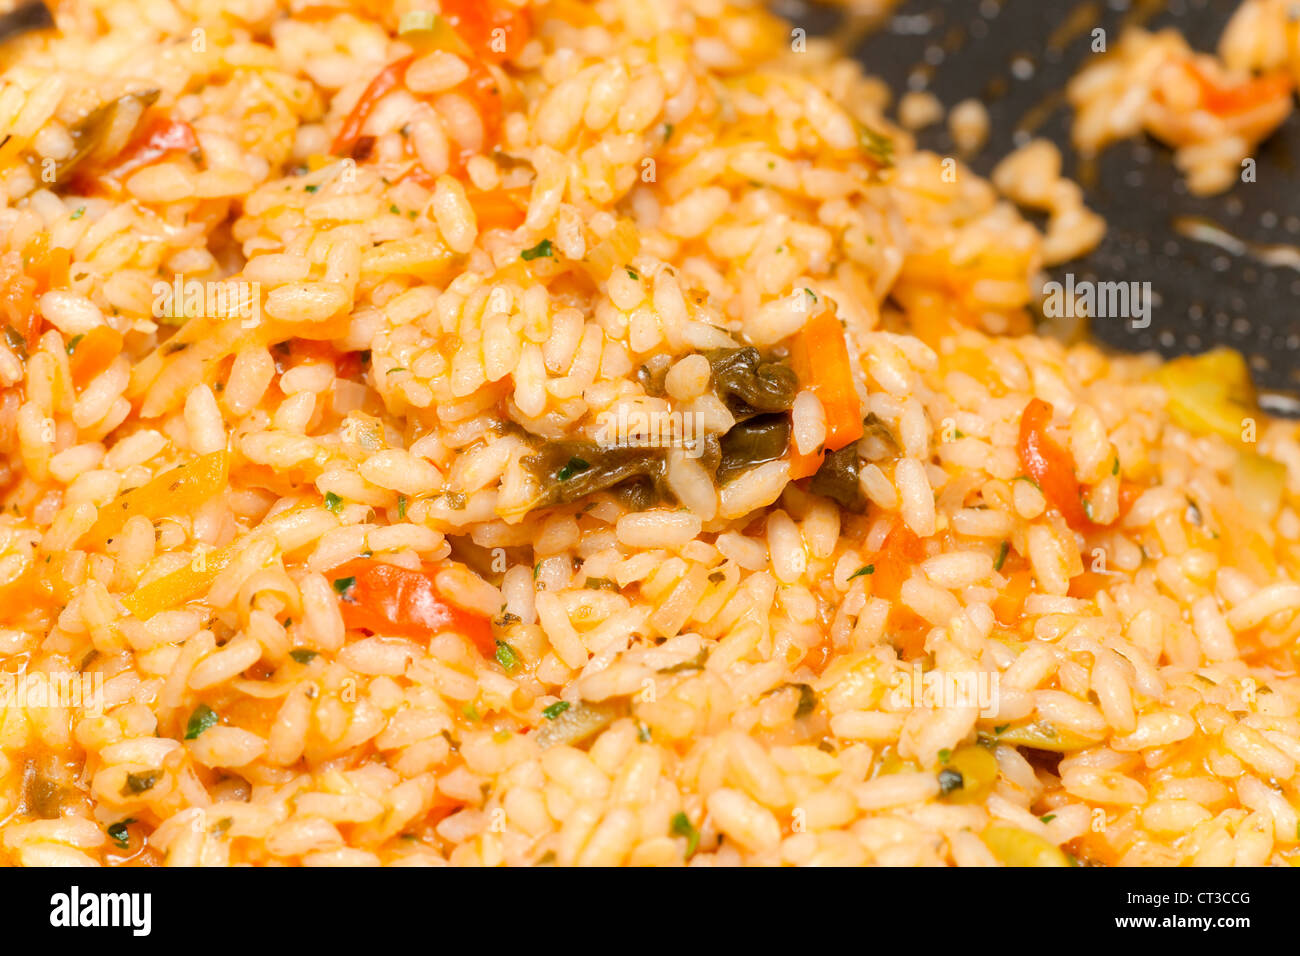 Rice with vegetables. Stock Photo